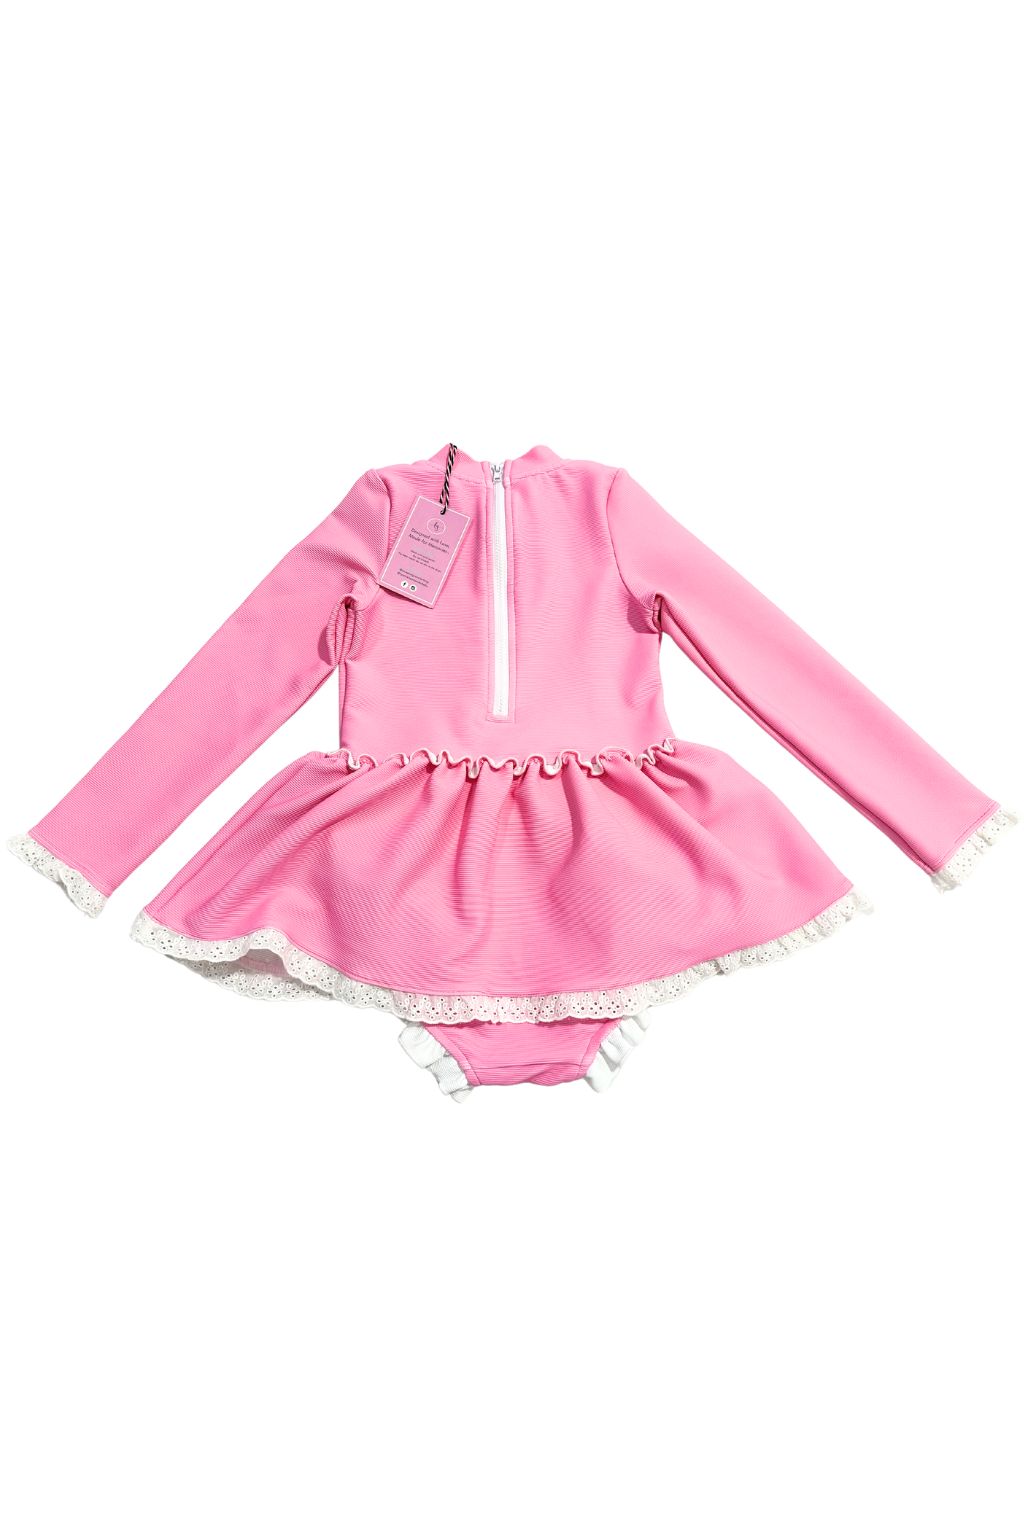 Prism Pink Skirted One Piece